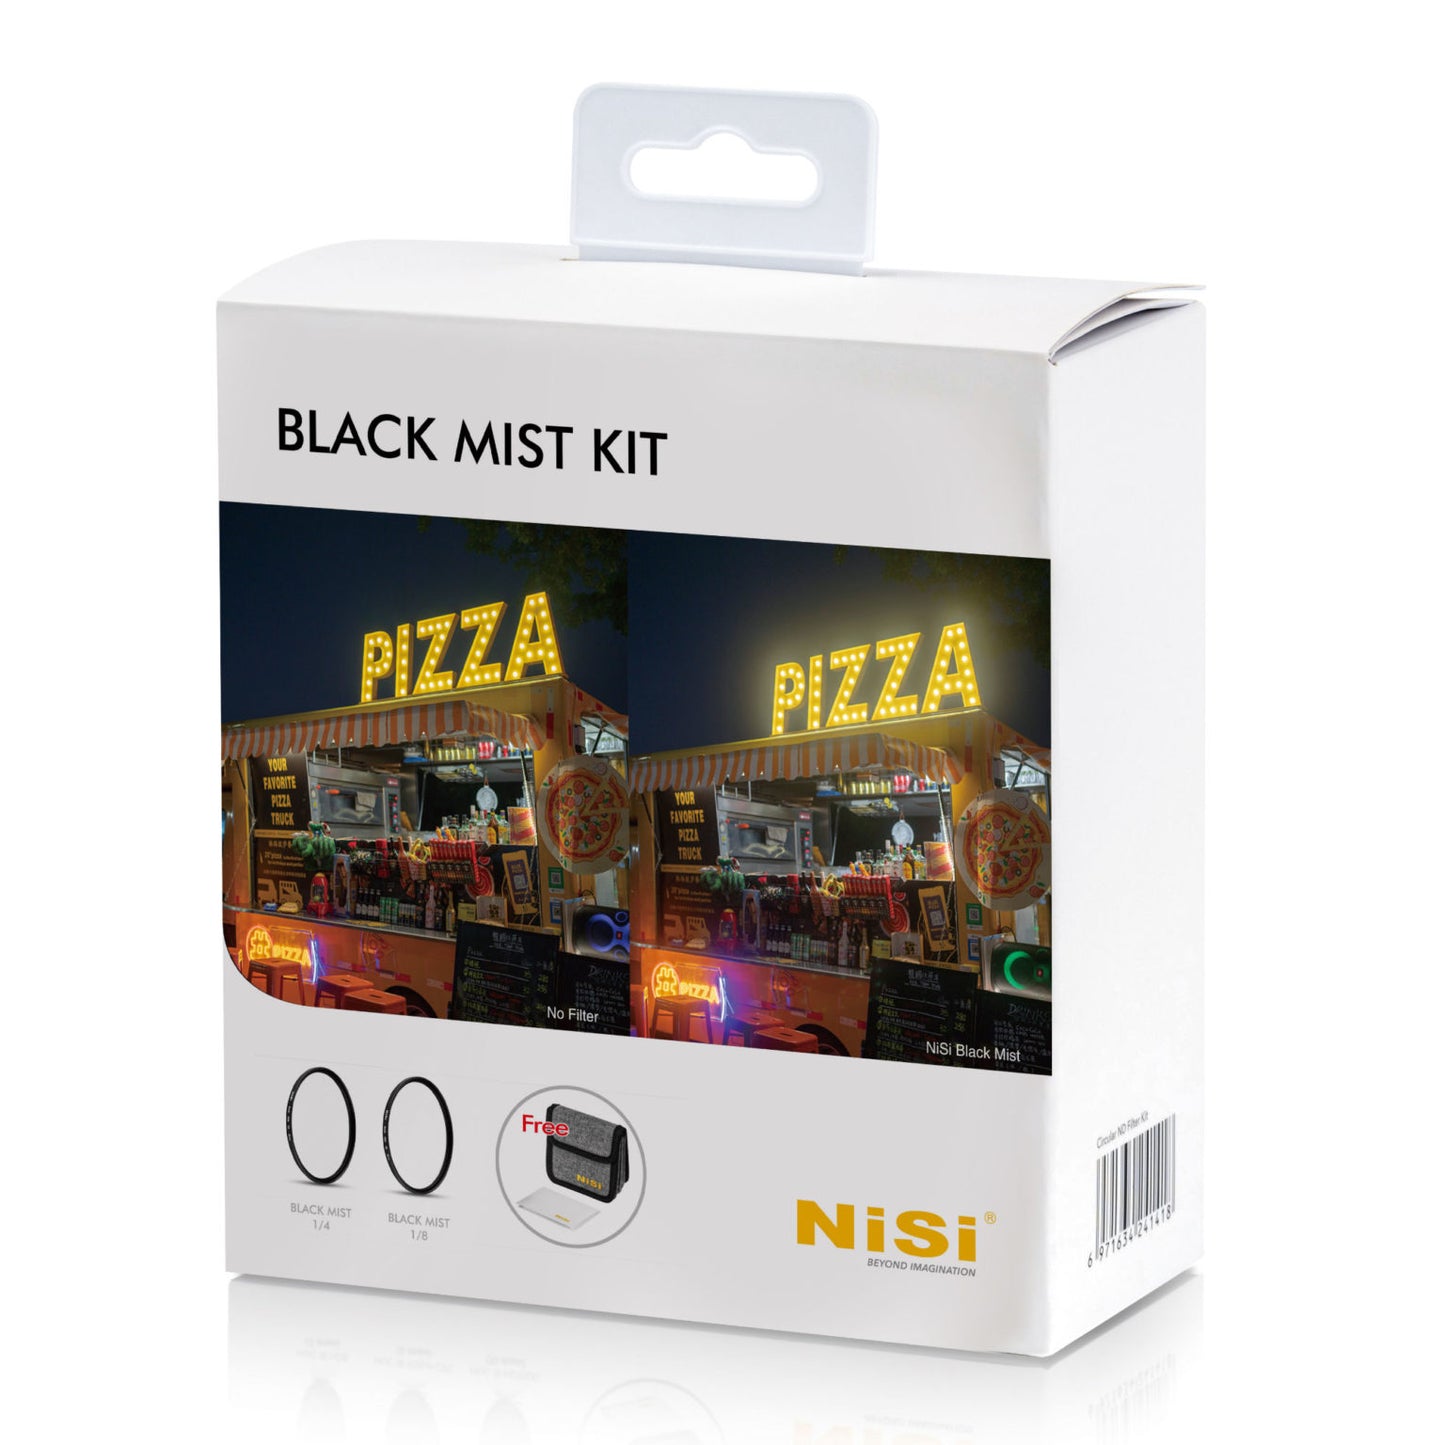 NiSi Black Mist Kit with 1/4, 1/8 and Case